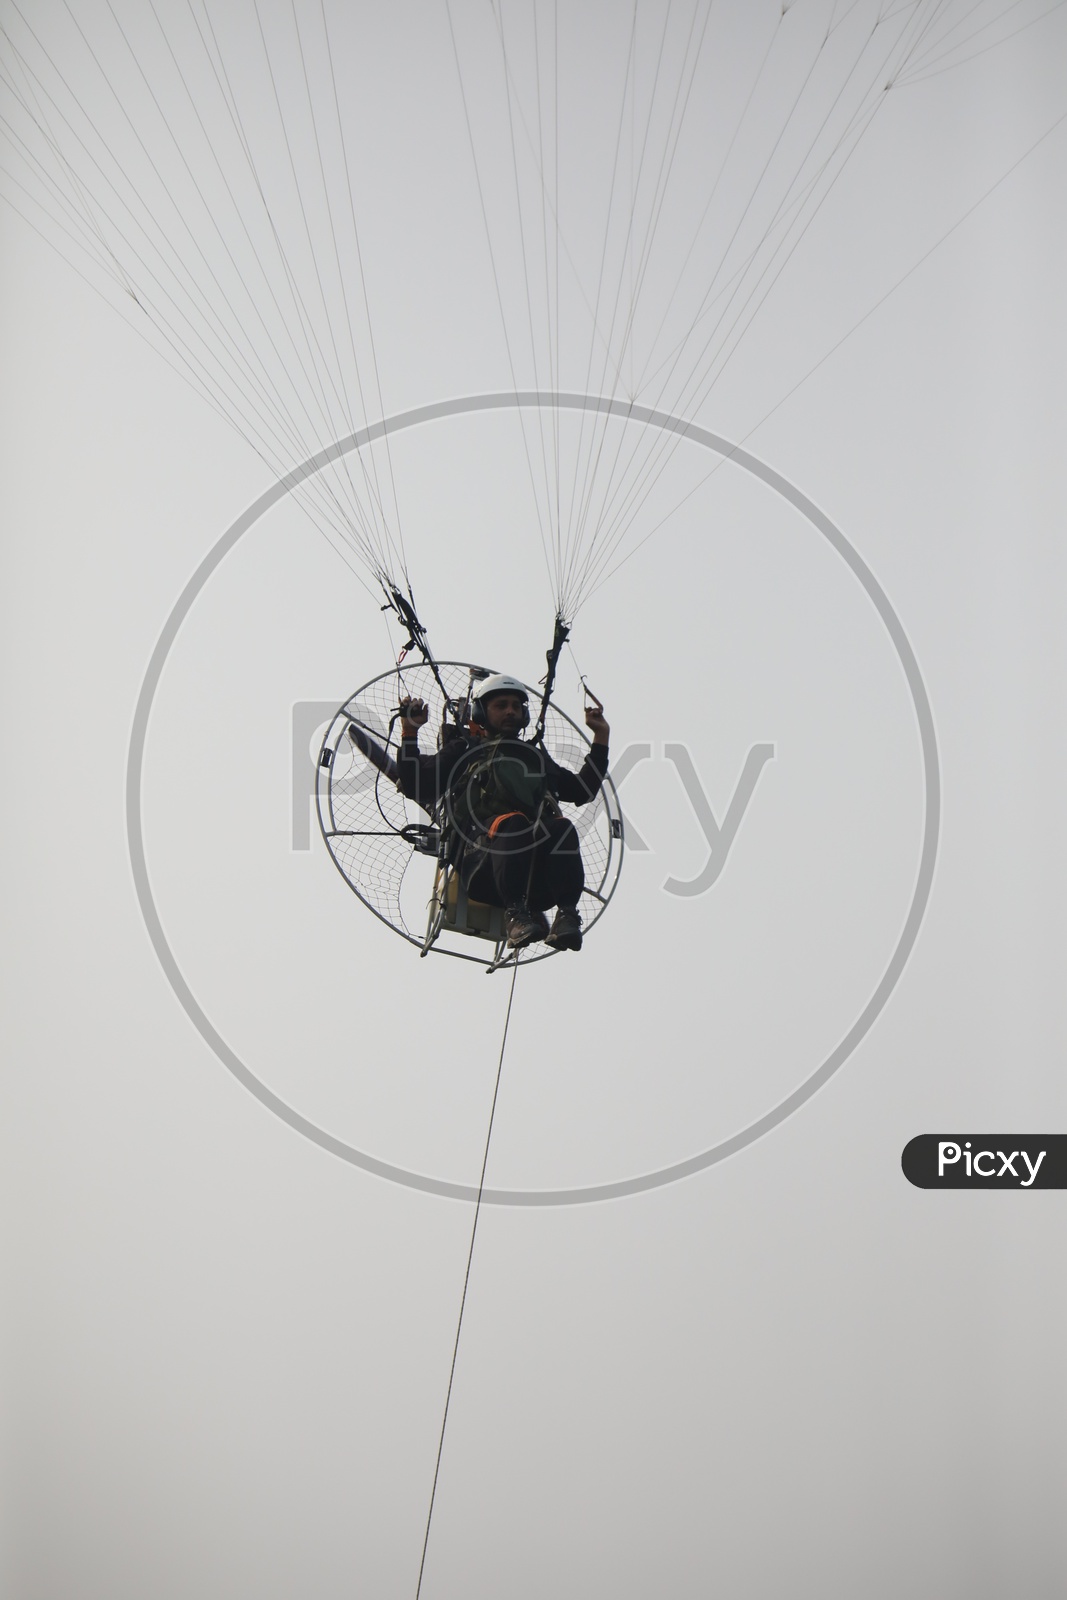 Indian Army Performing Powered Paragliding